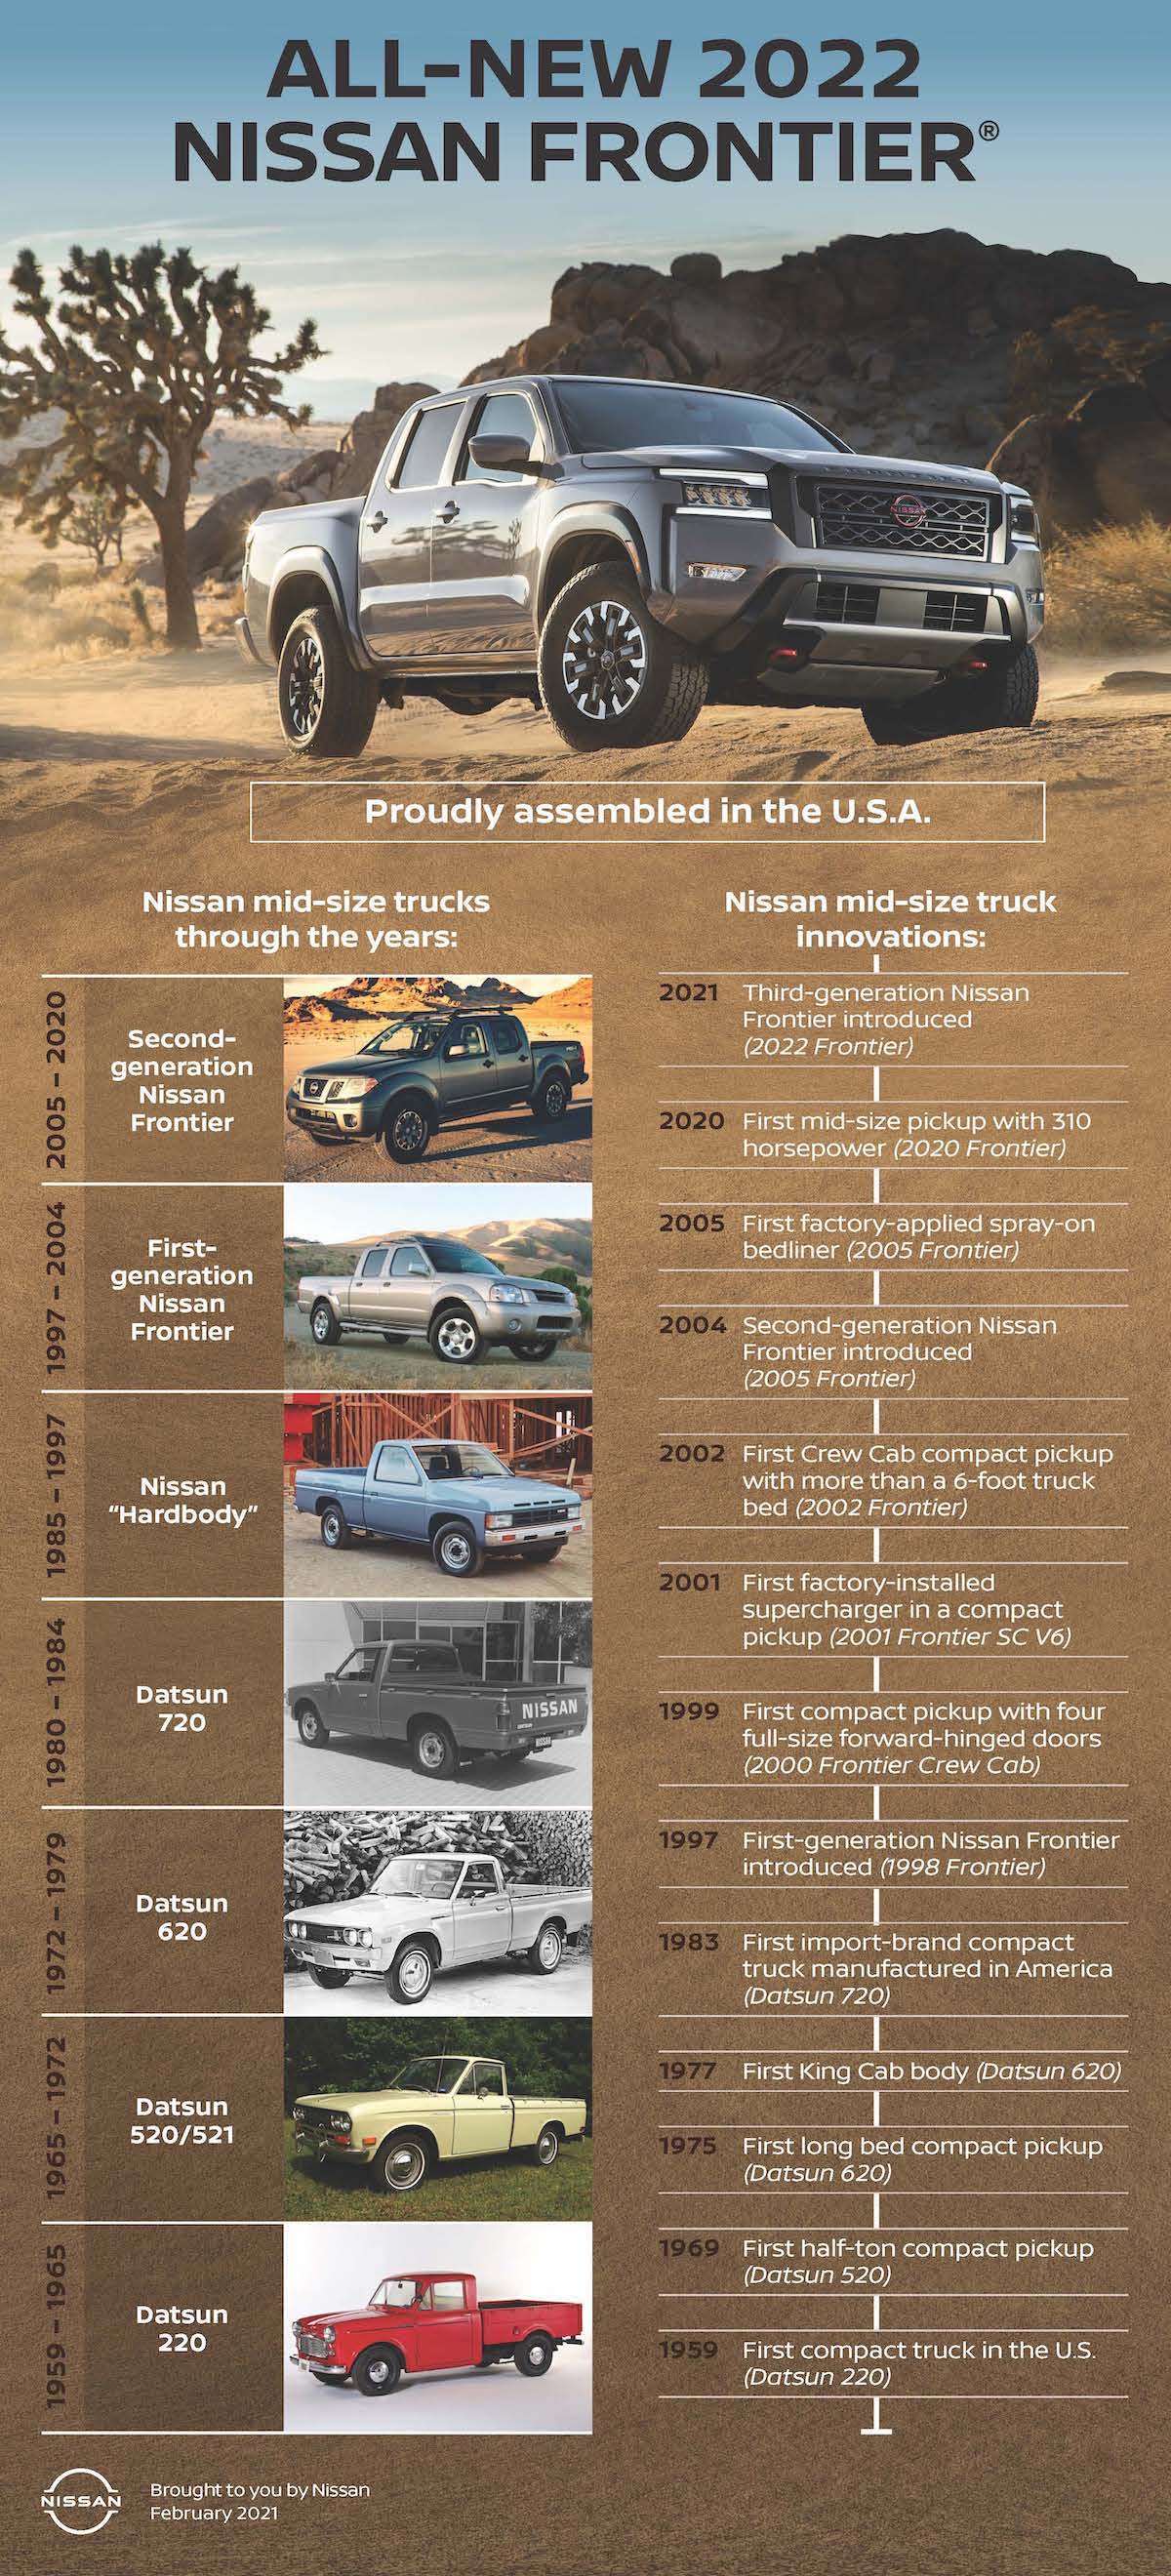 All-new 2022 Nissan Frontier Infographic.jpg